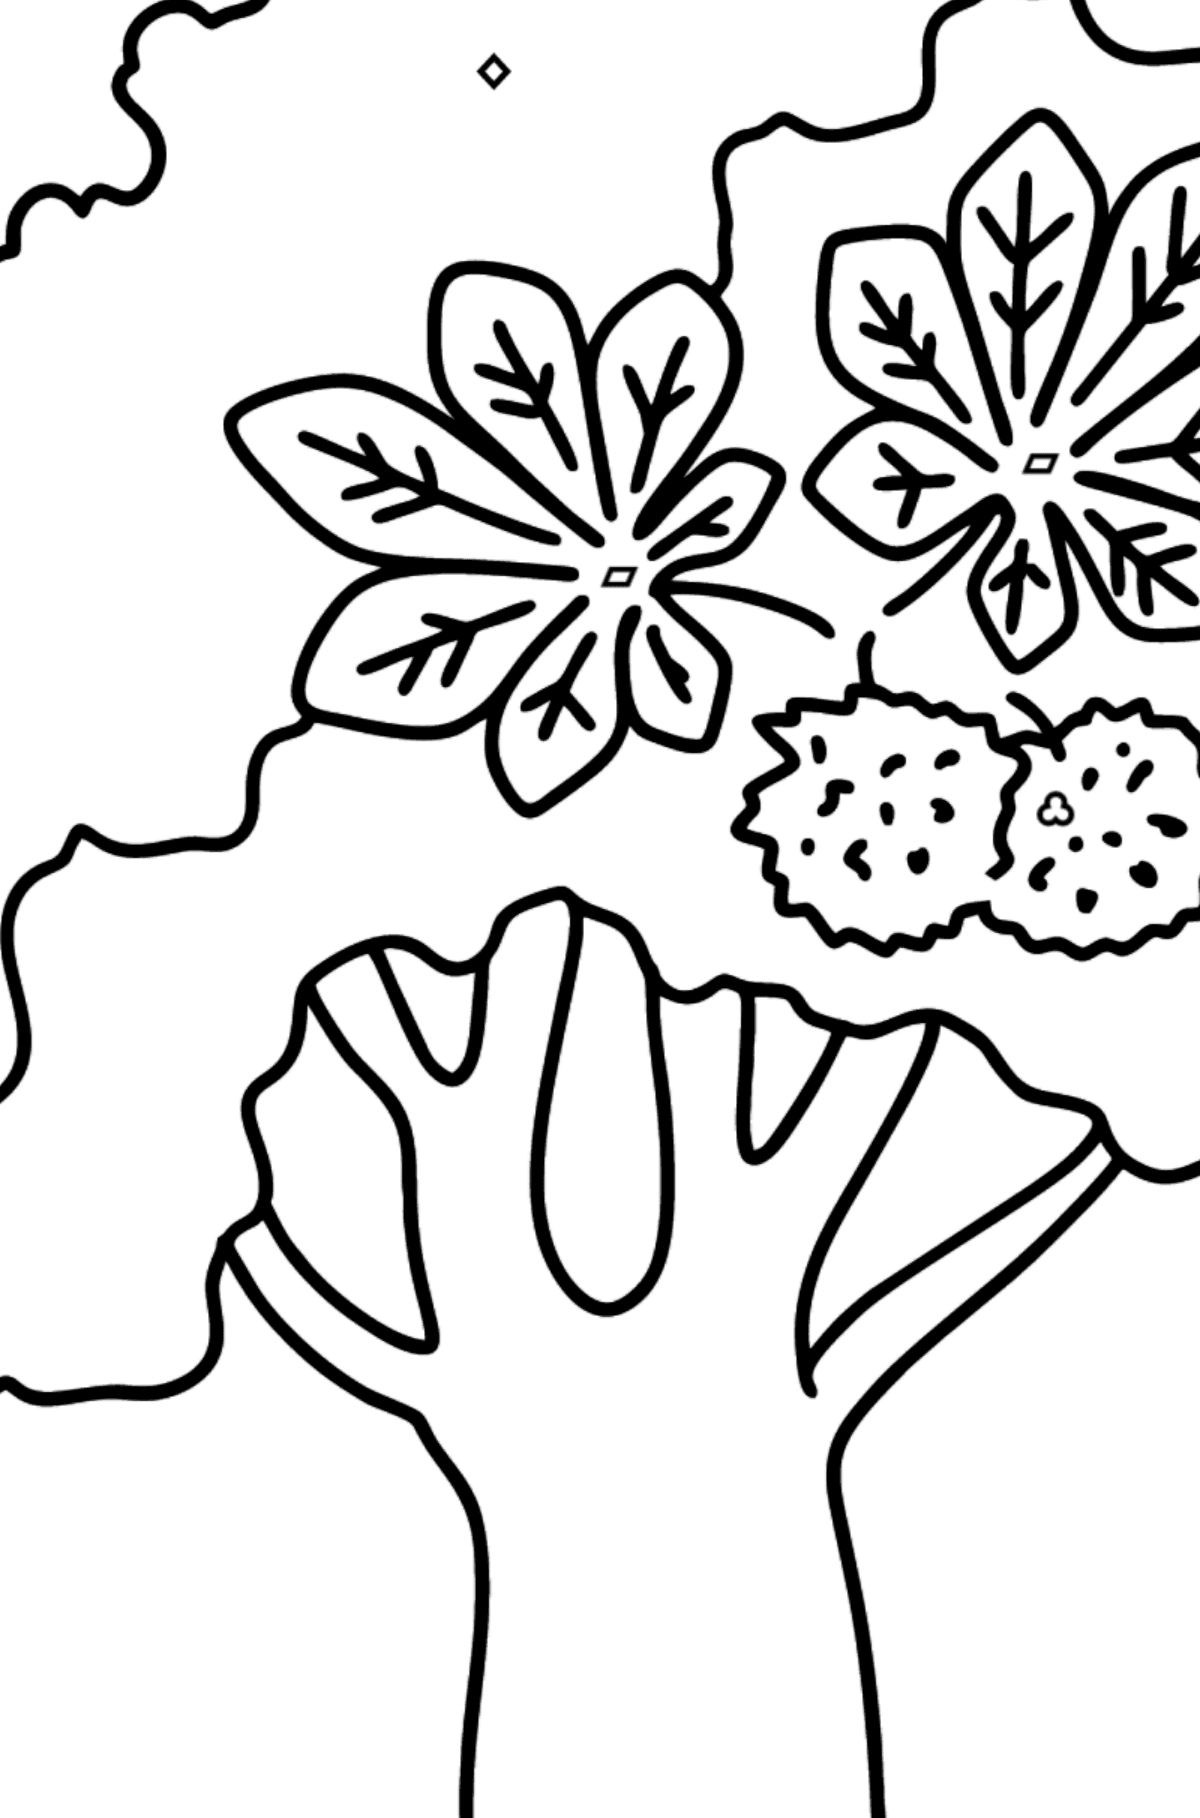 Chestnut coloring page - Coloring by Geometric Shapes for Kids